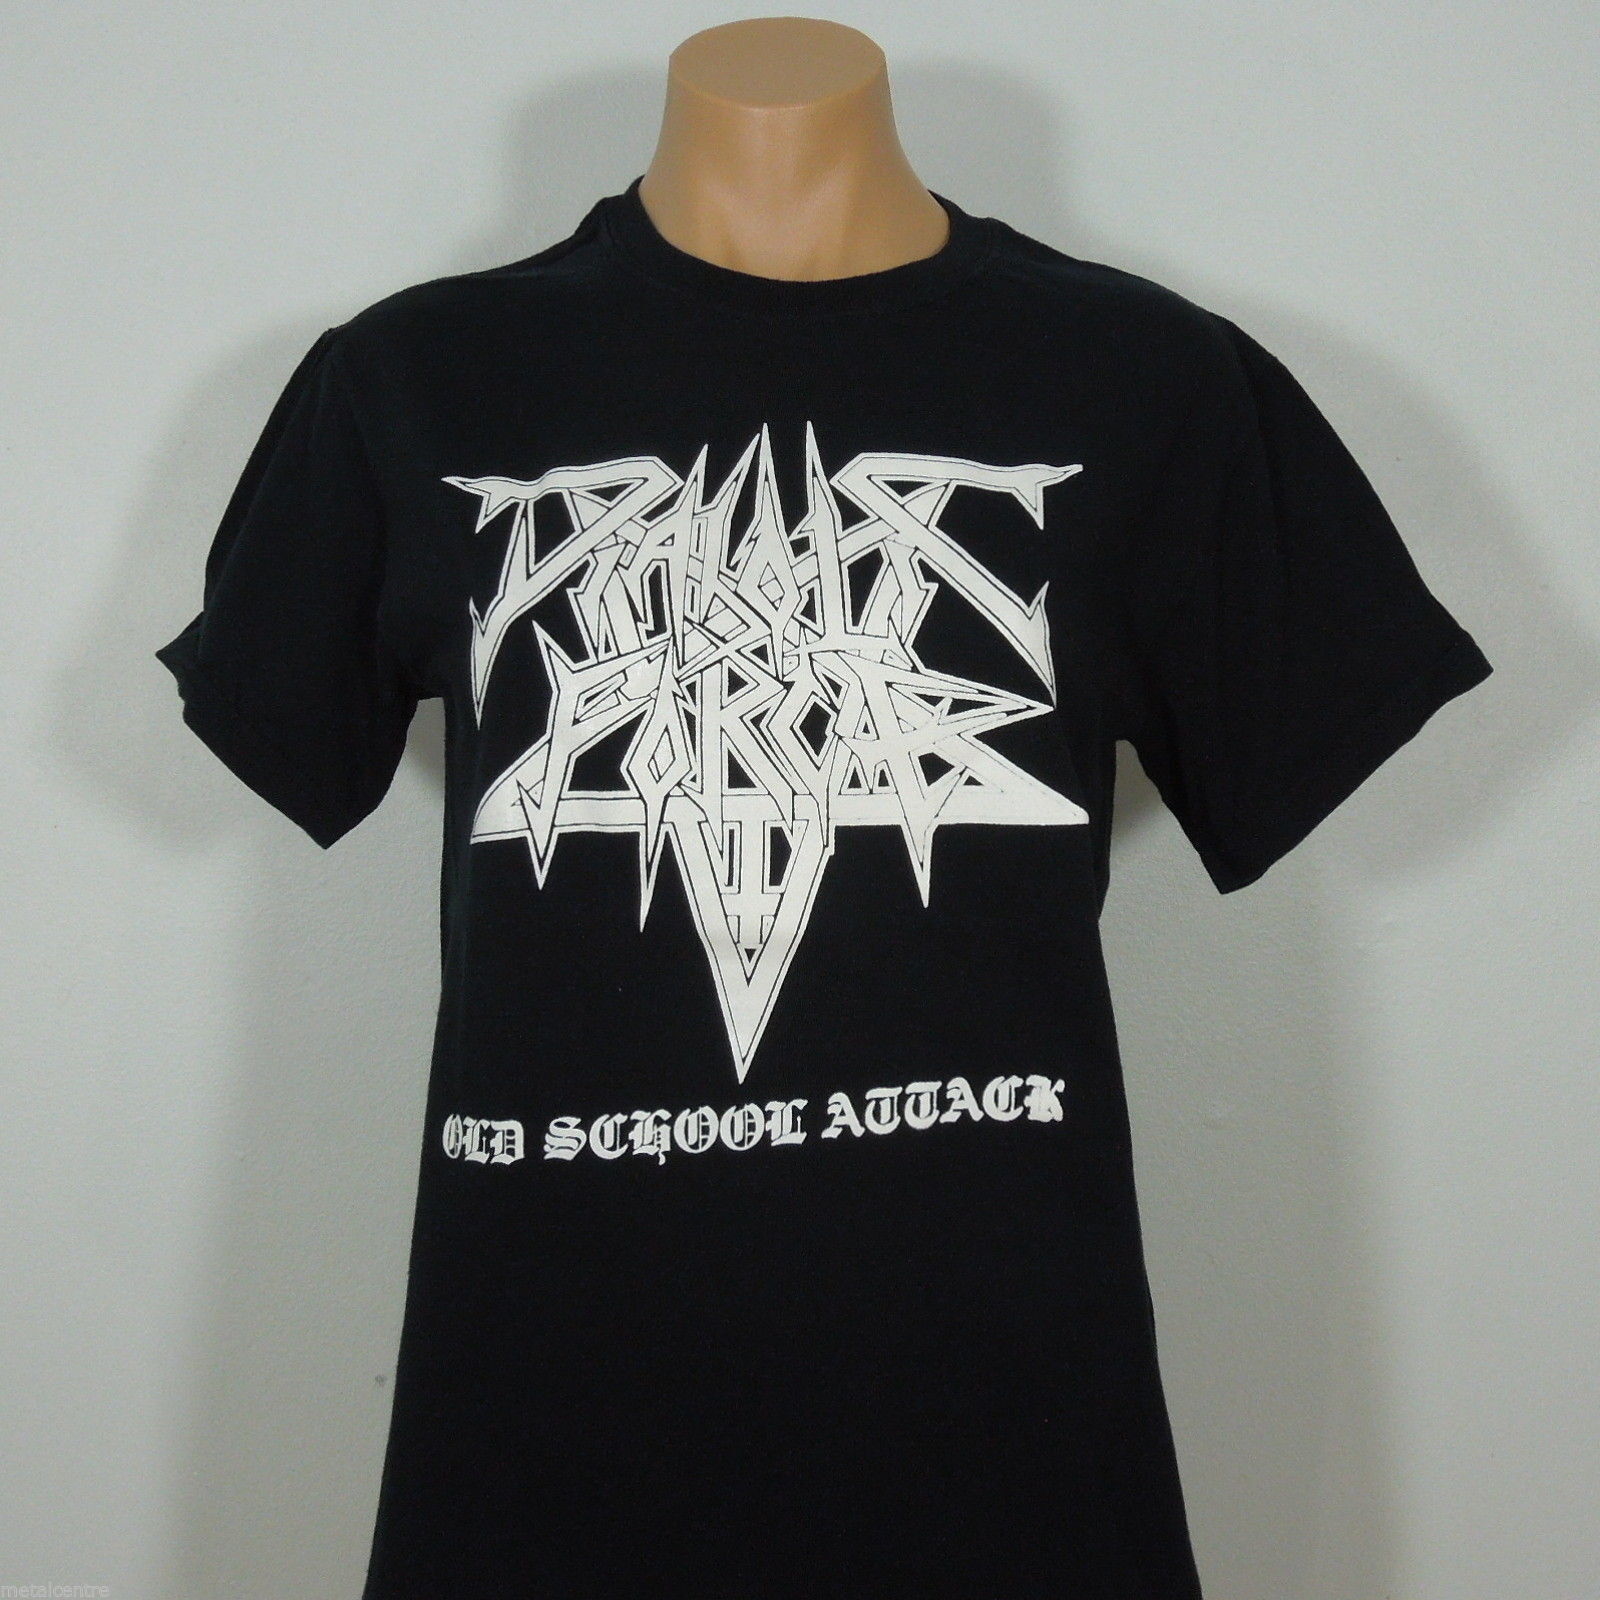 Diabolic Force - Old School Attack - T-Shirt (TS in white)